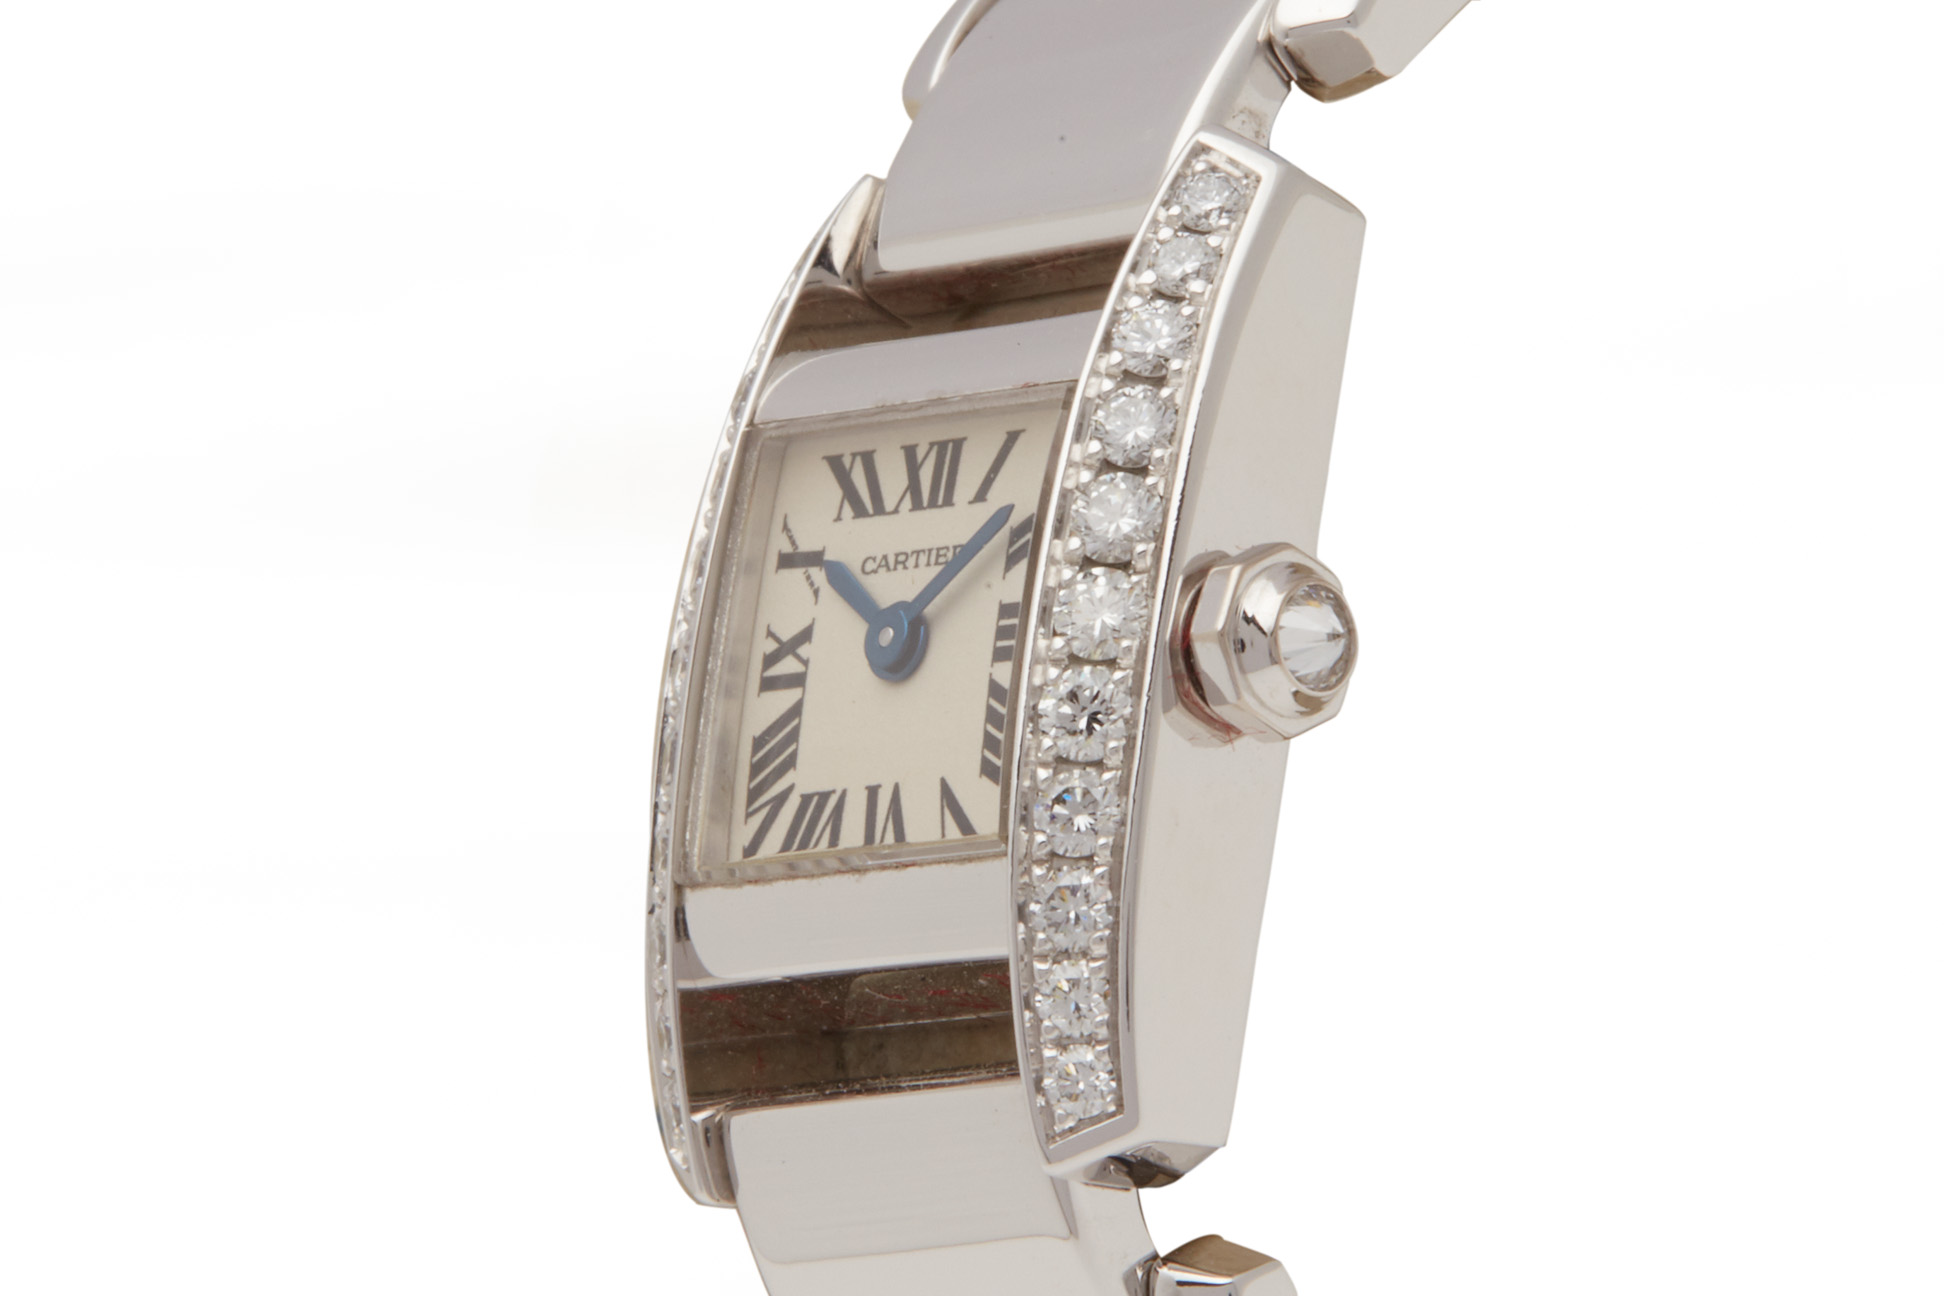 A CARTIER TANKISSIME WHITE GOLD AND DIAMOND BRACELET WATCH - Image 2 of 3